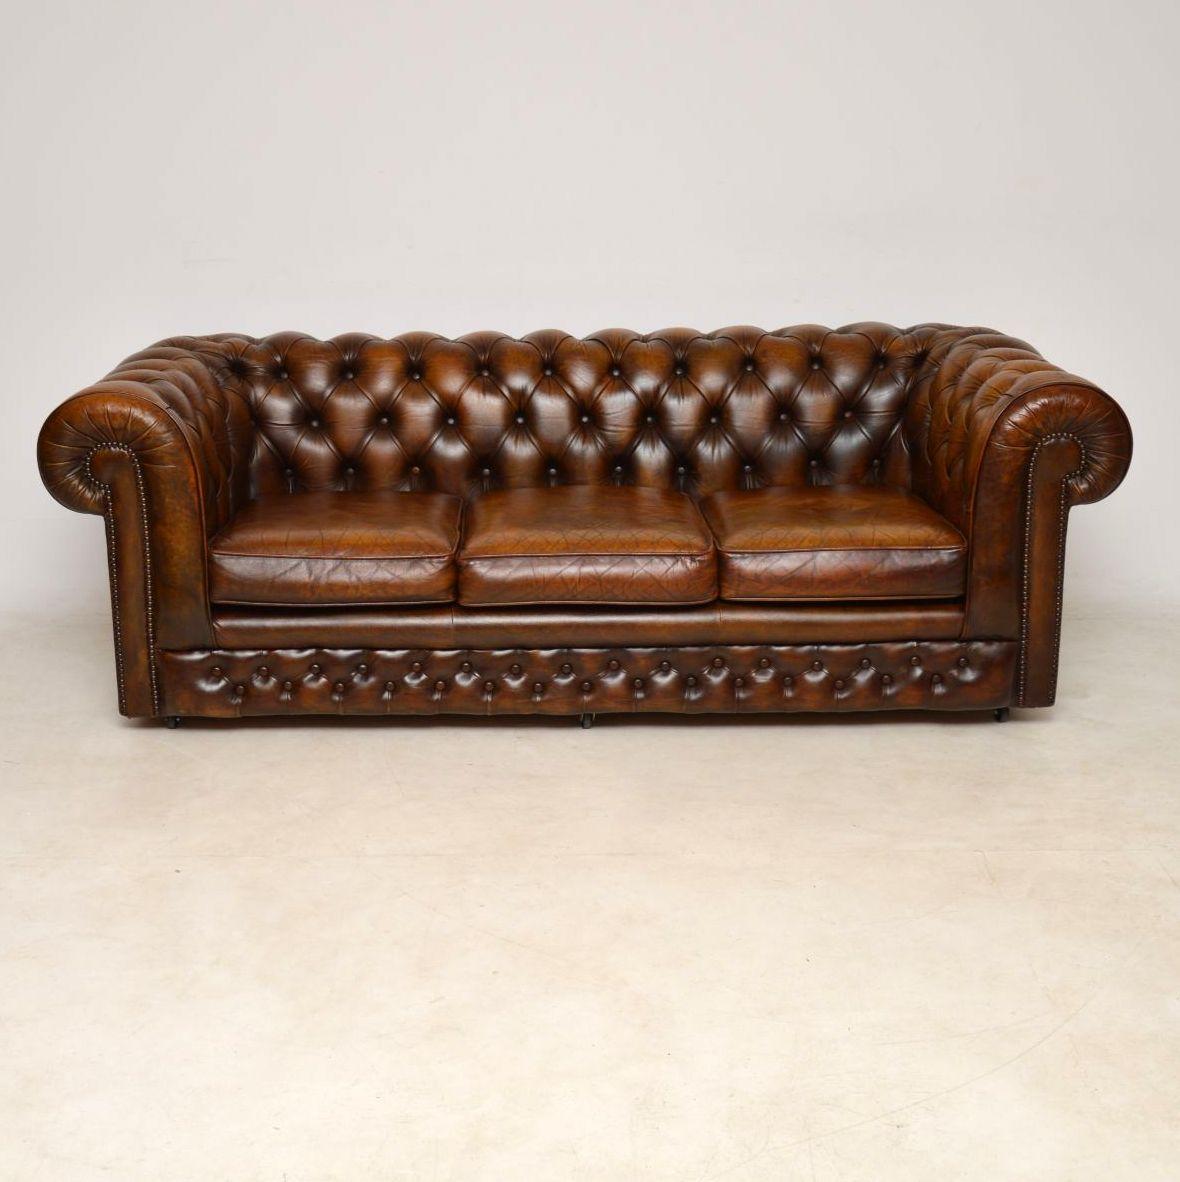 This antique leather three-seat Chesterfield sofa has aged beautifully and consequently has a wonderful color which in turn gives it loads of character. Normally, we have these Chesterfields and most leather items revived, enhanced and polished,